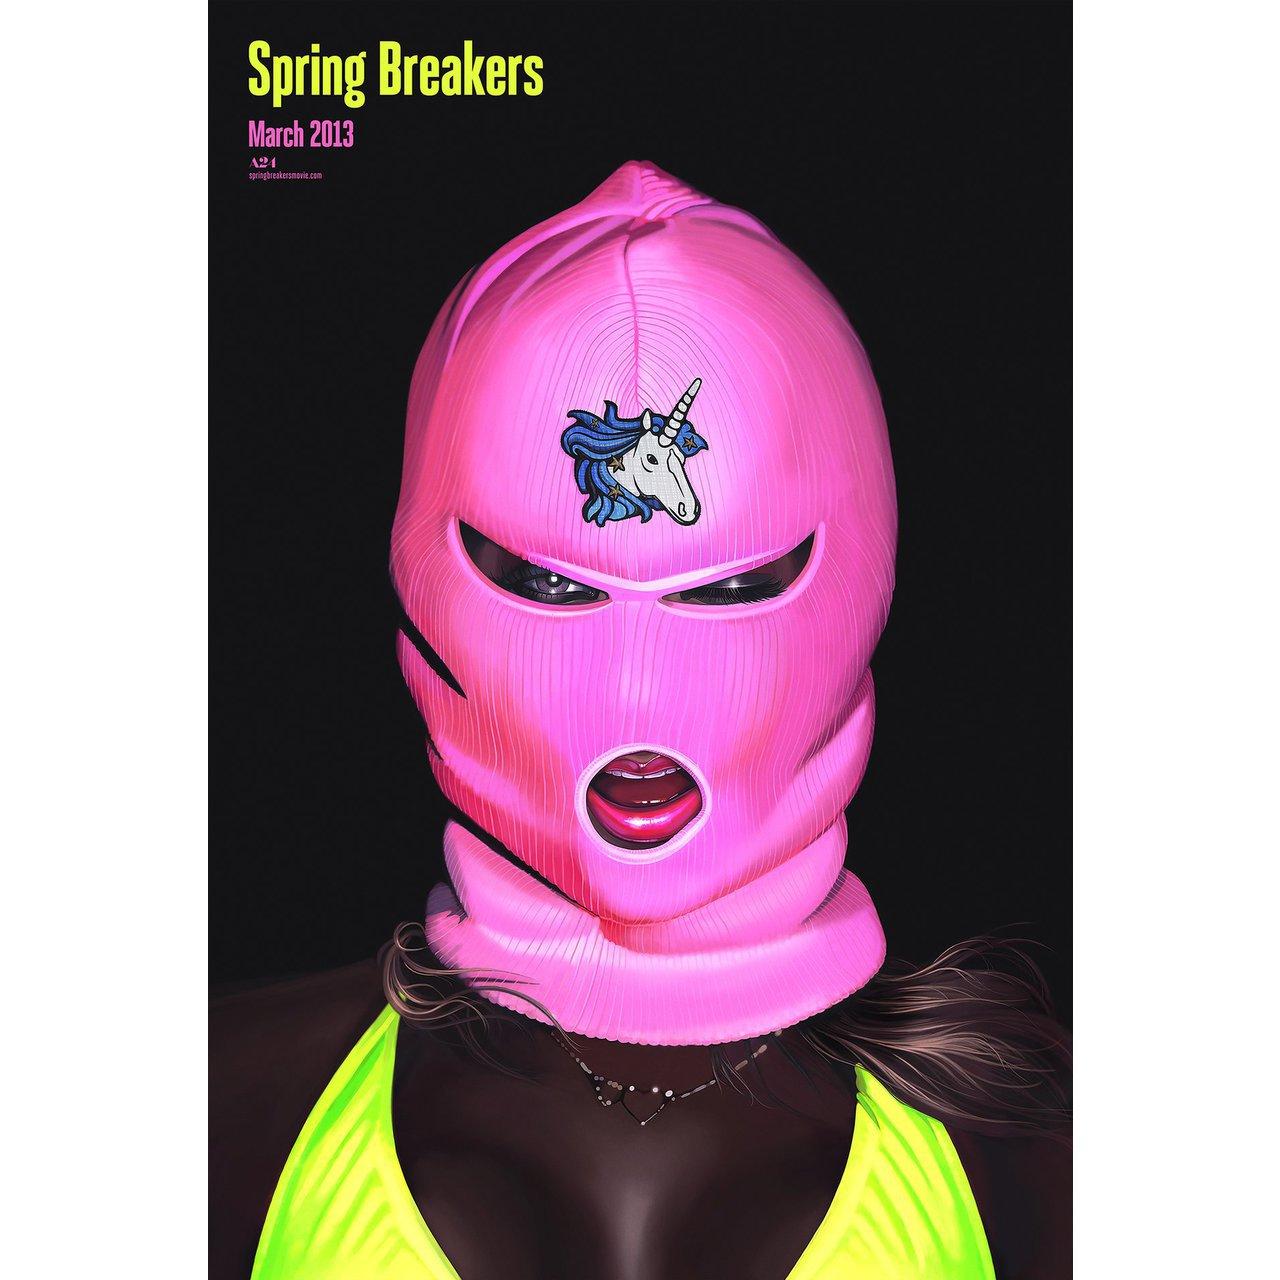 Original 2020 U.S. one sheet poster by Akiko Stehrenberger for the 2012 film Spring Breakers directed by Harmony Korine with James Franco / Selena Gomez / Vanessa Hudgens / Ashley Benson. Signed by Akiko Stehrenberger. Fine condition, rolled. Please